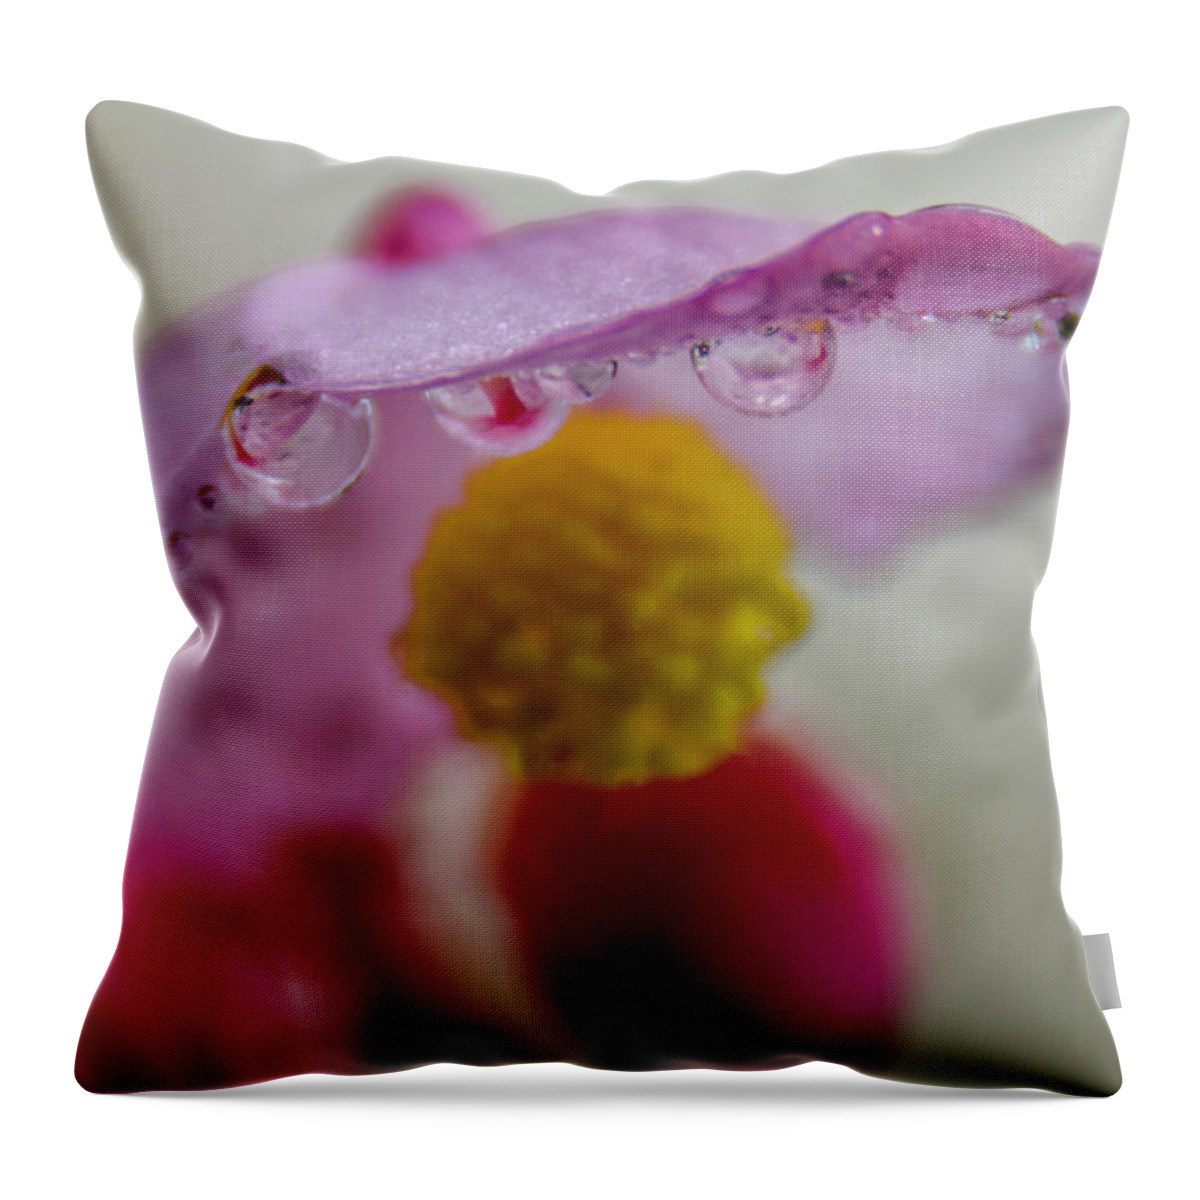 Plant Throw Pillow featuring the photograph Umbrella Blossom by Wolfgang Stocker